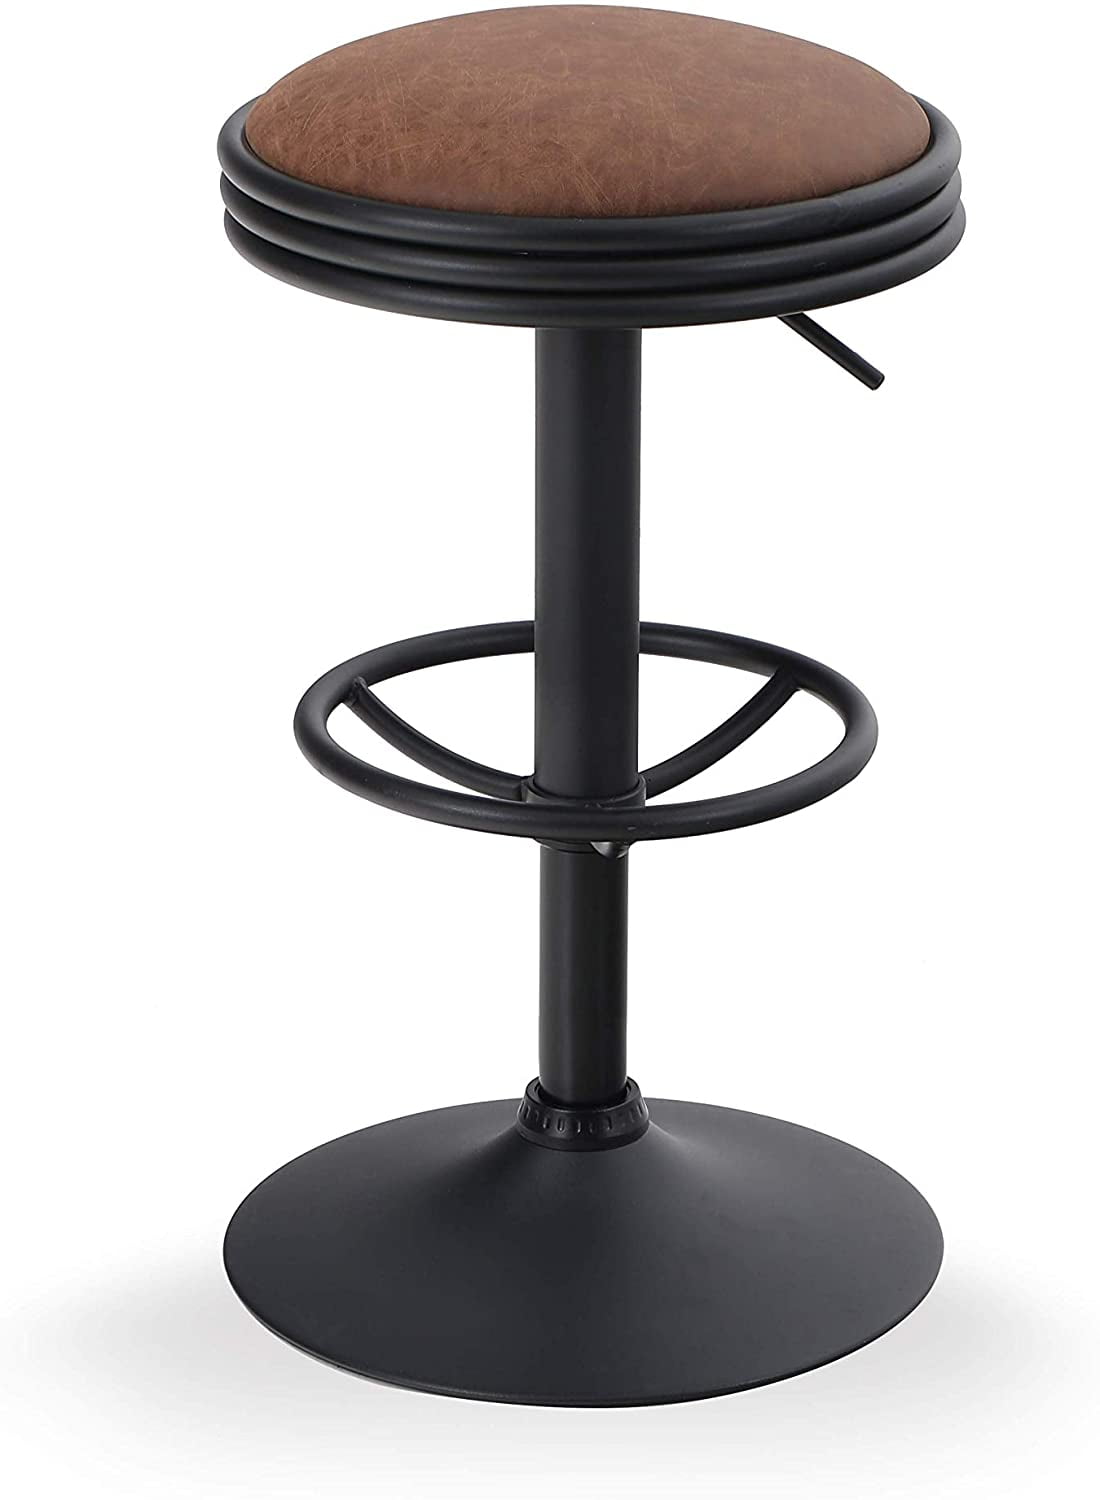 Round Swivel Bar Stool Counter Height, Leather Swivel Barstool Counter Height